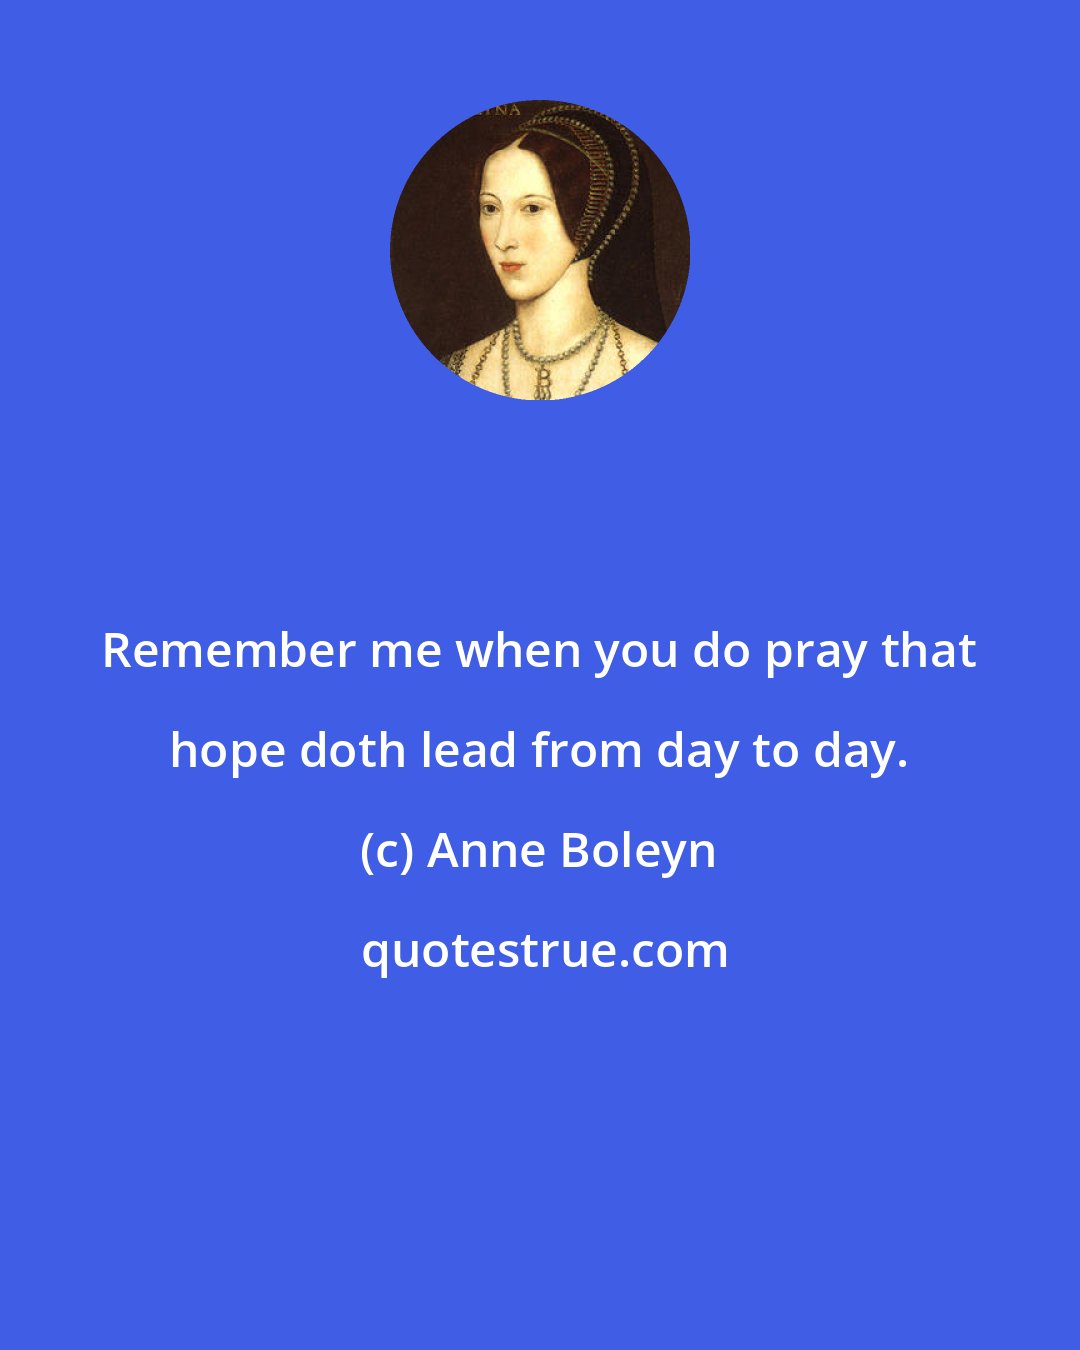 Anne Boleyn: Remember me when you do pray that hope doth lead from day to day.